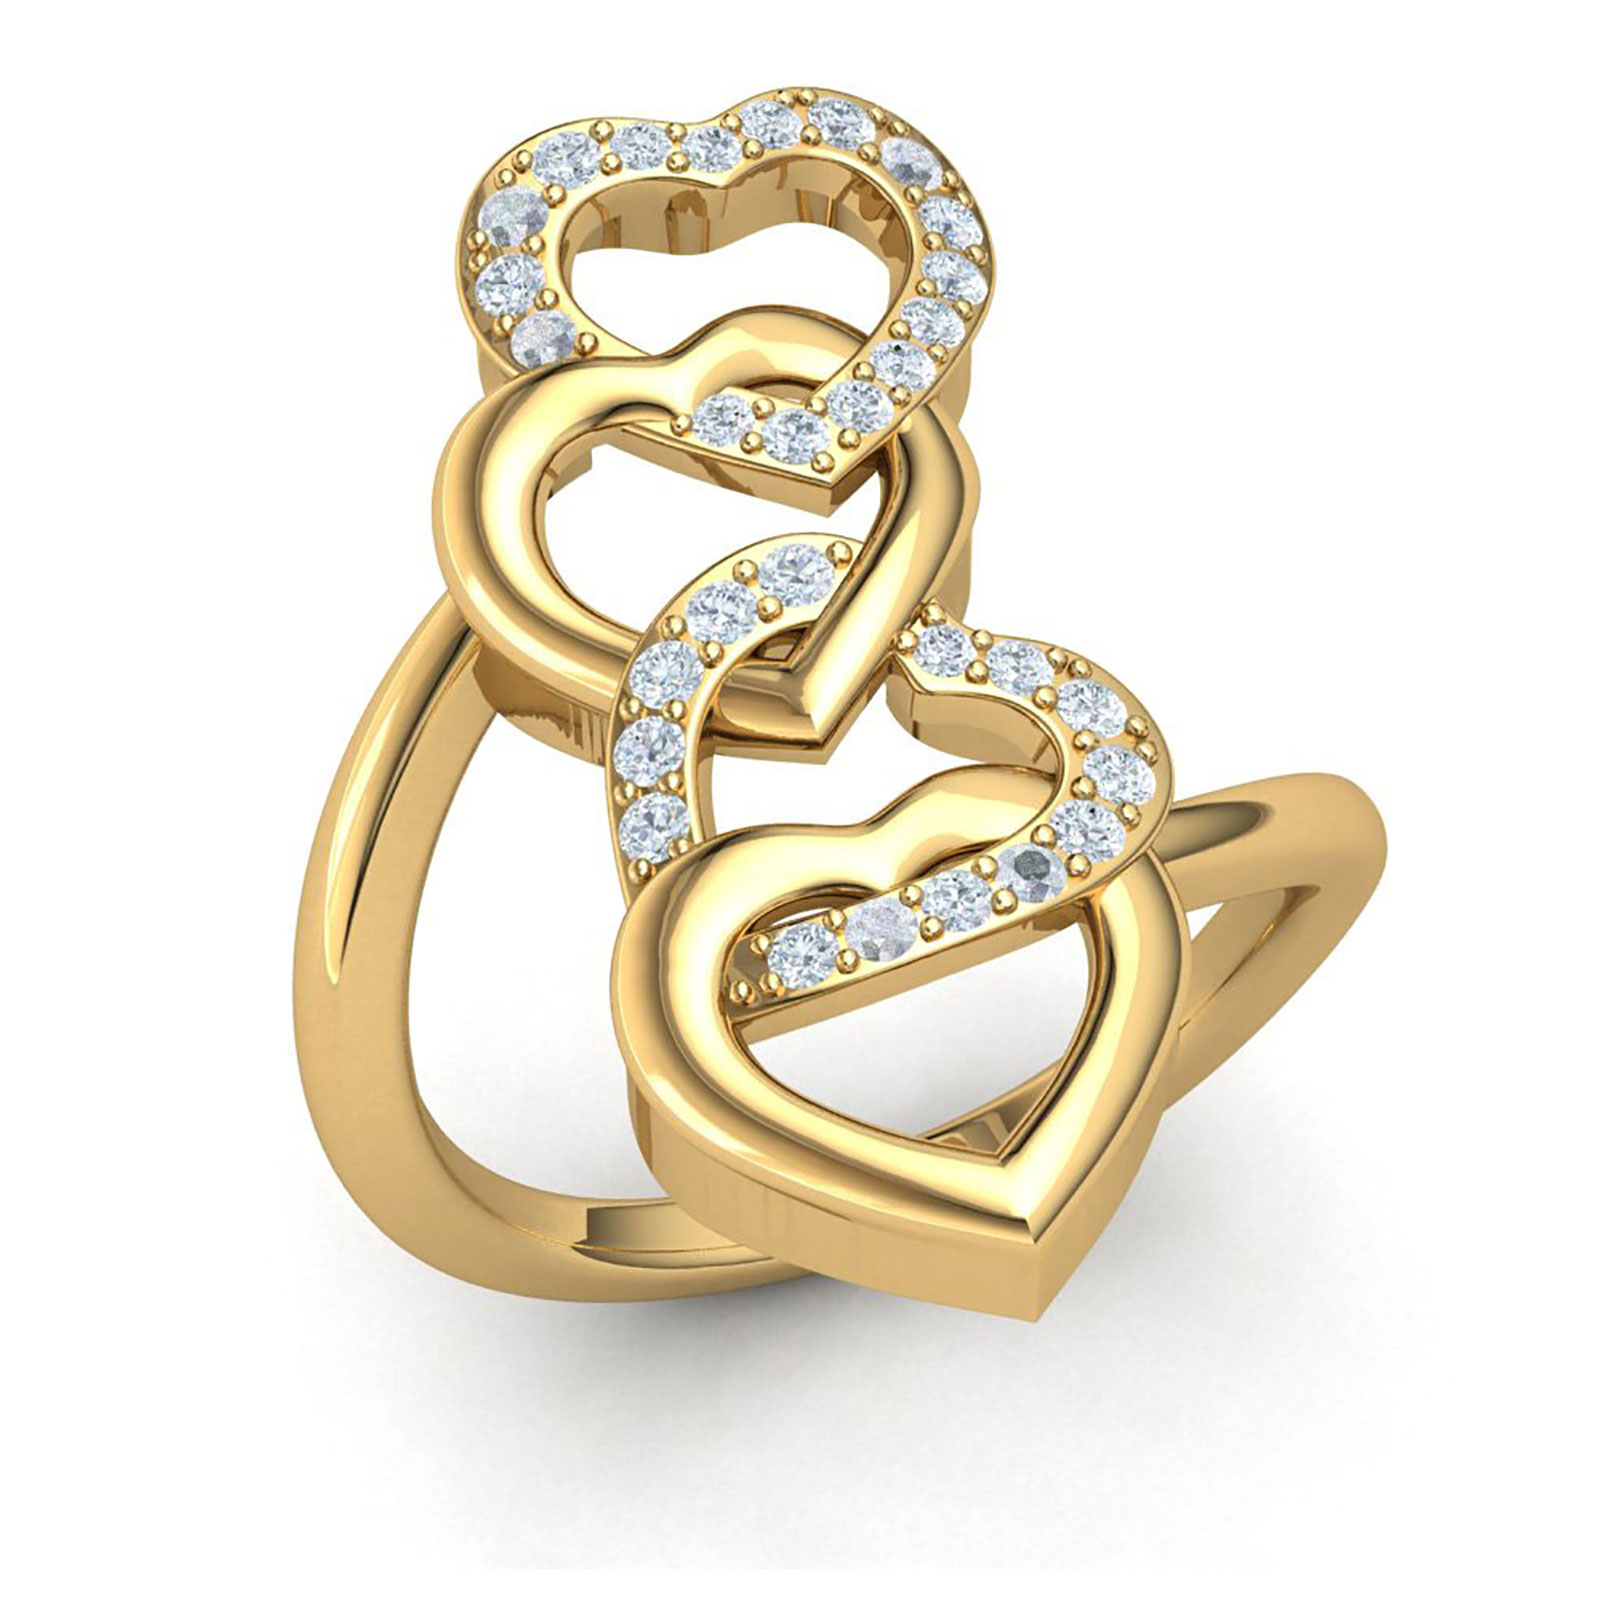 Jewel We Sell Genuine 0.5ctw Round Cut Diamond Fancy Intertwined Linked Hearts Ring Bridal Anniversary 18K Yellow Gold